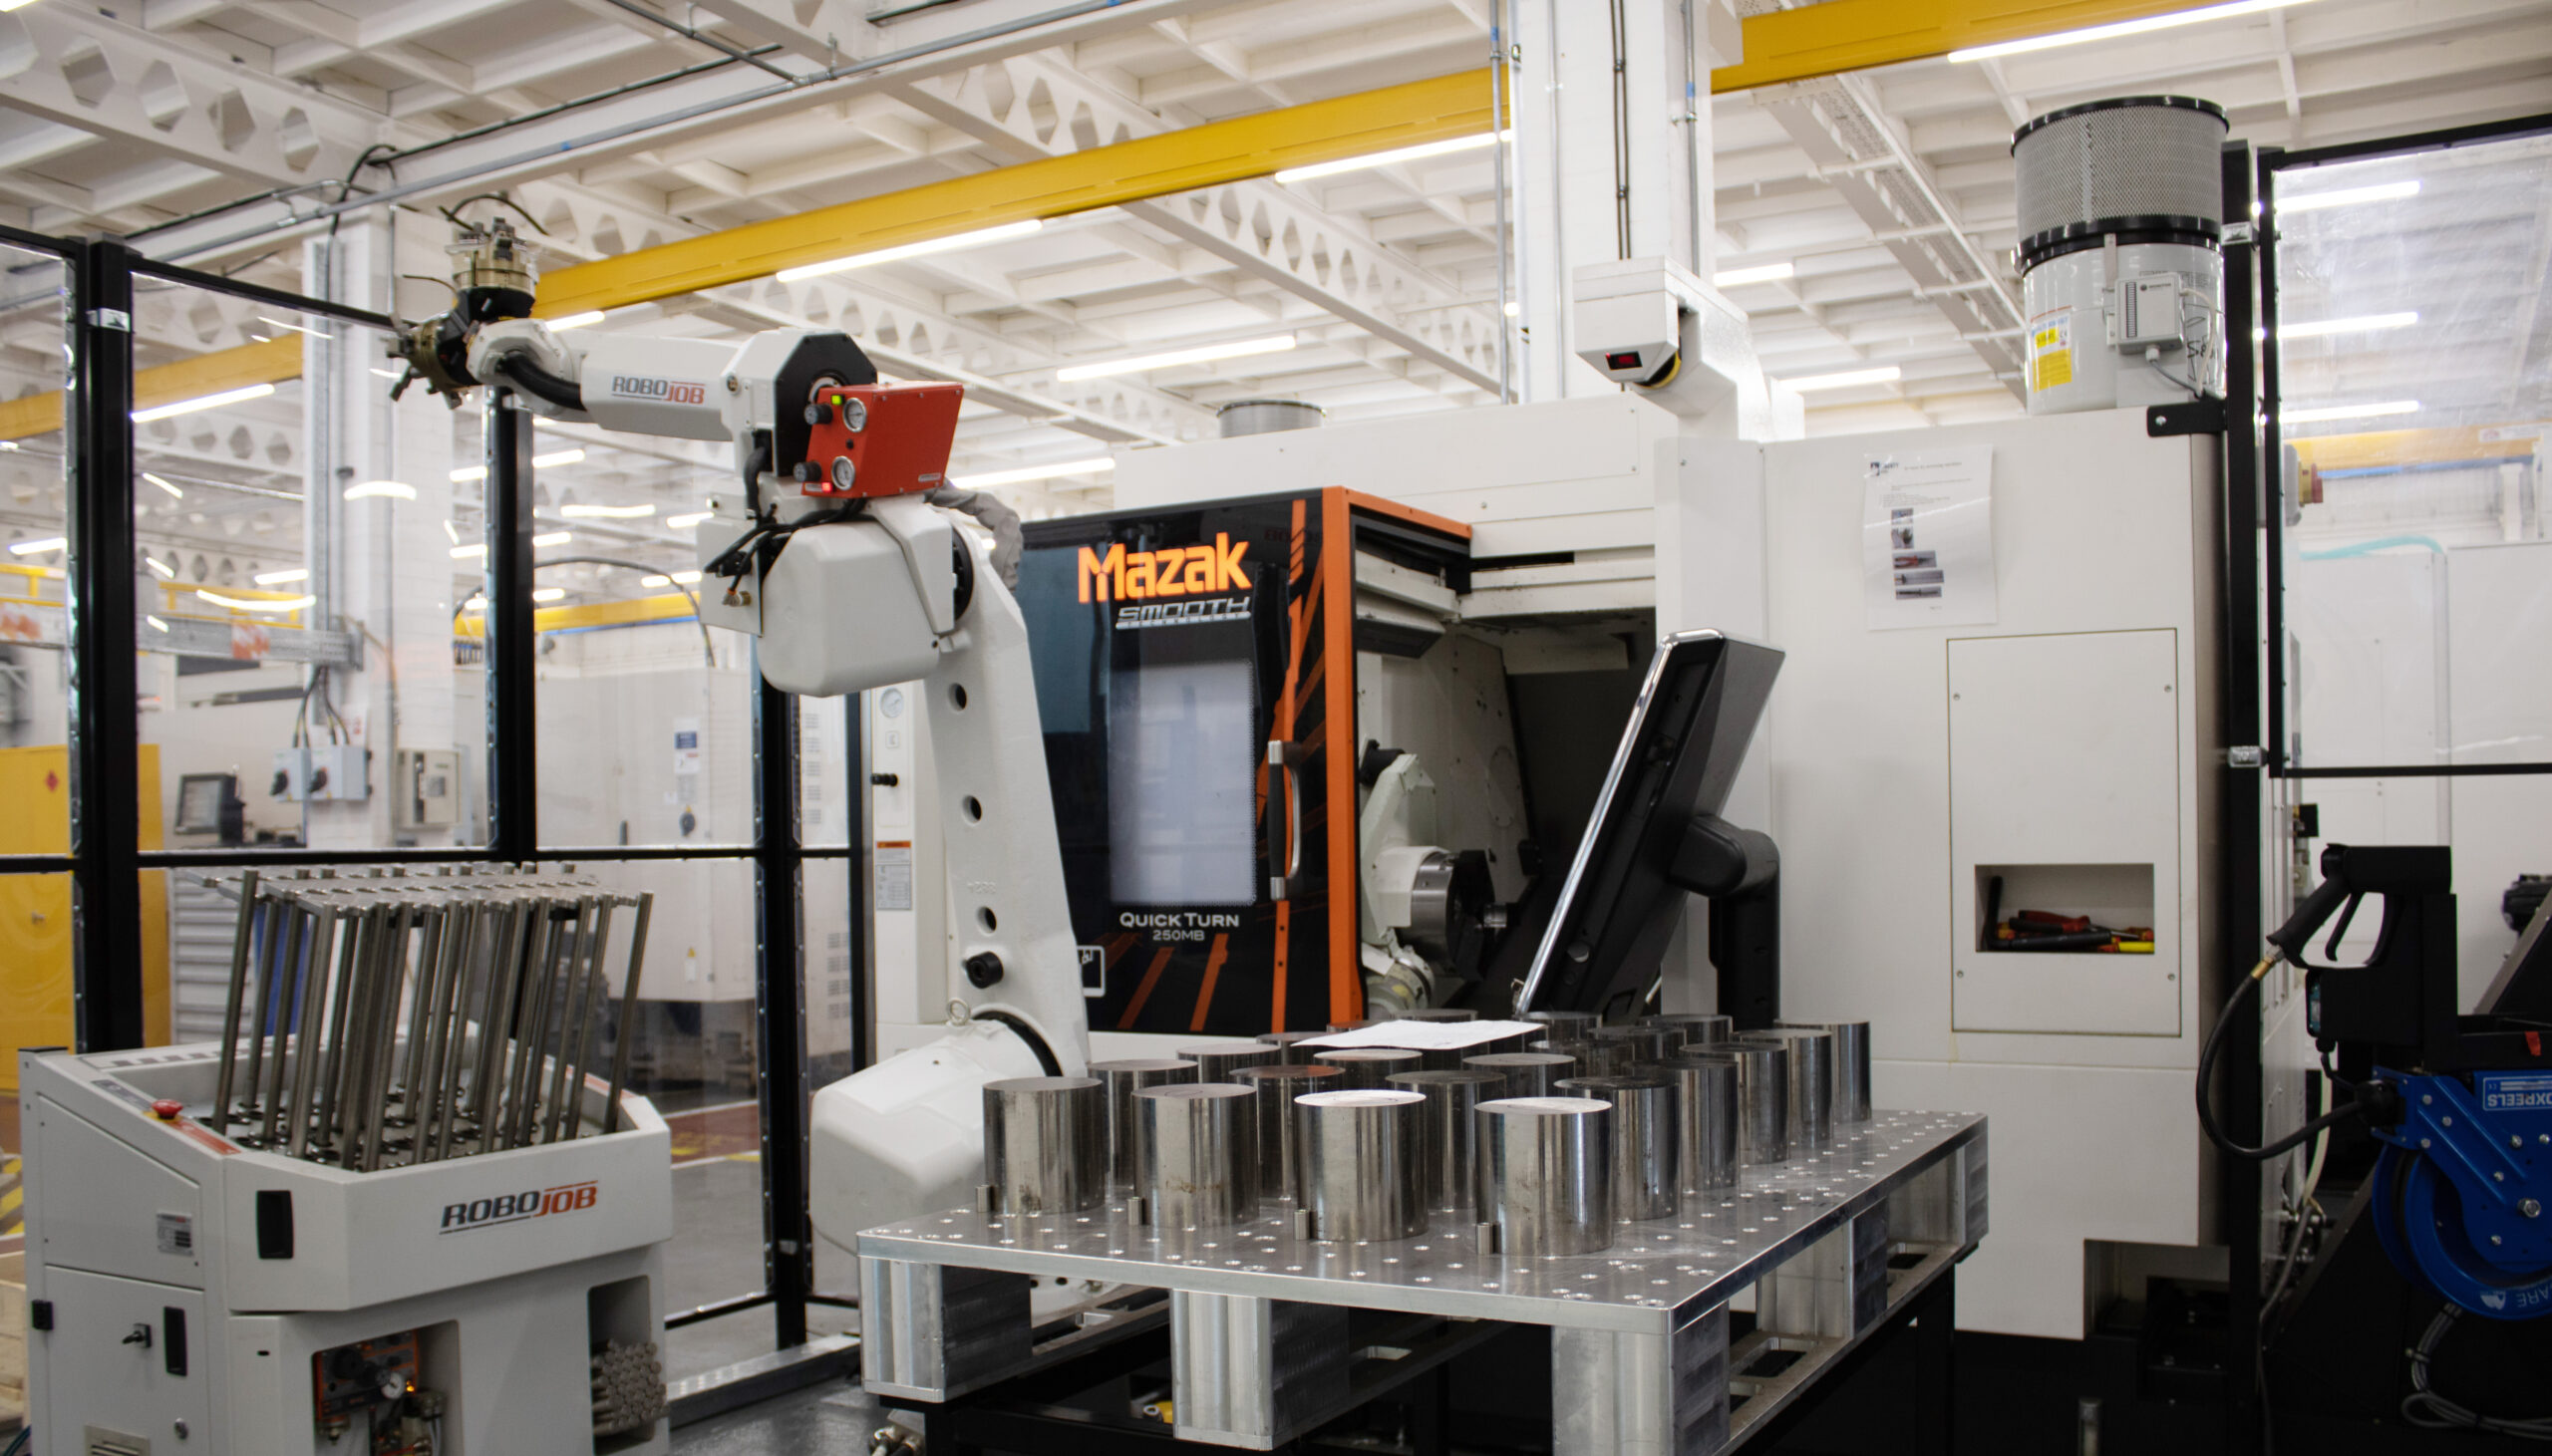 Liberty Advanced Machining Centre: Where Steel Meets Innovation